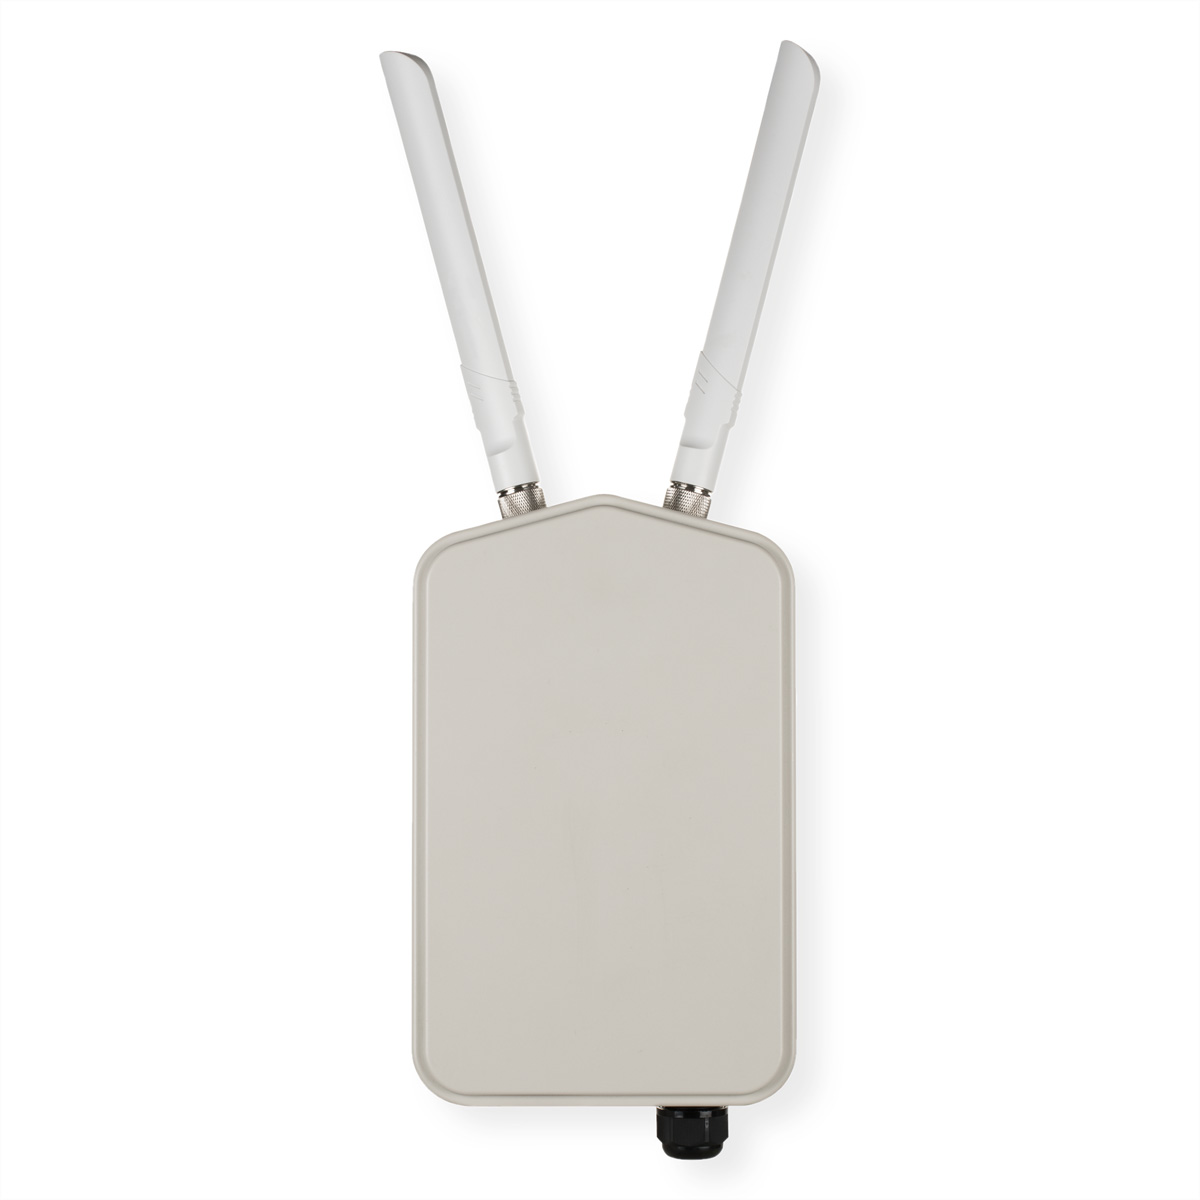 D-LINK DWL-8720AP 2 Outdoor Band Wave Unified Dual Access Gbit/s 1,3 Point AC1300 Point Access